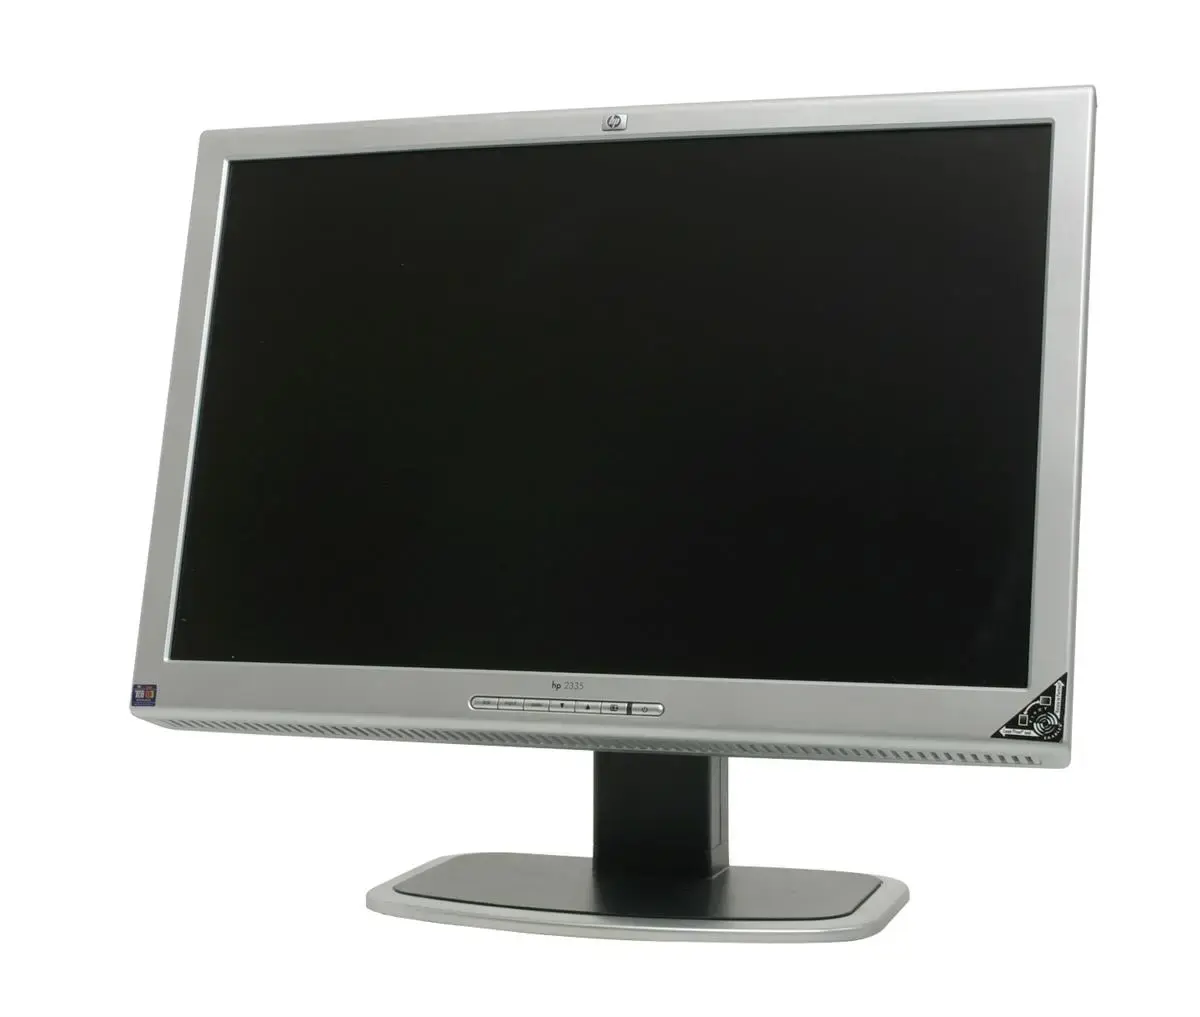 P9615A HP L2335 23-inch Wide Screen TFT LCD Flat panel ...